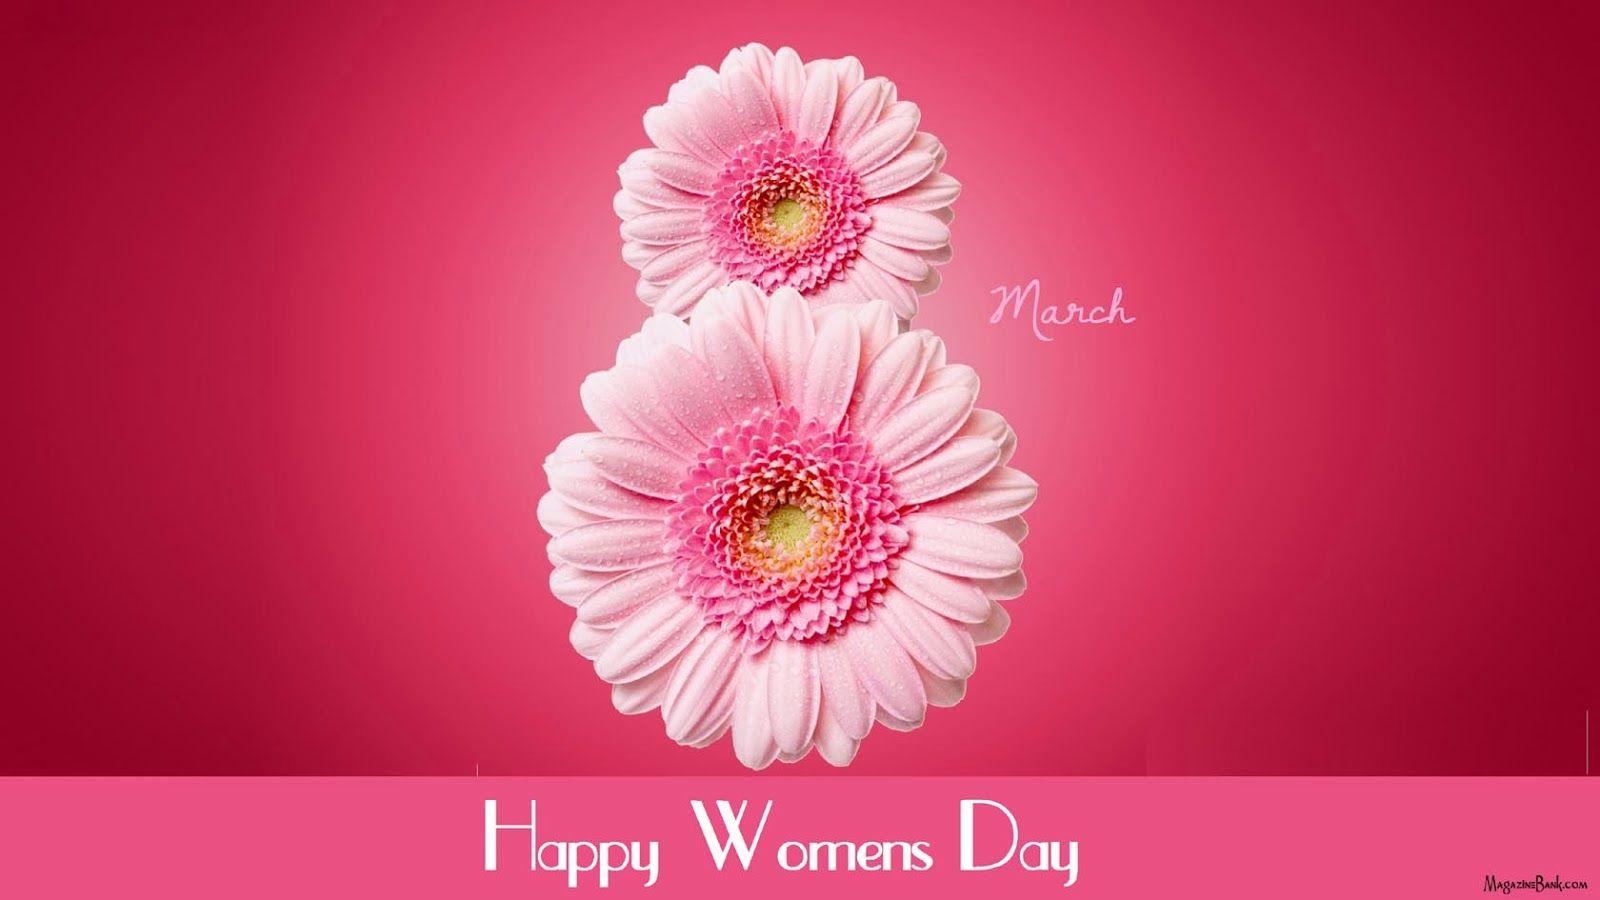 Happy Women's Day HD Wallpaper 2014 Collection 8 March. Happy